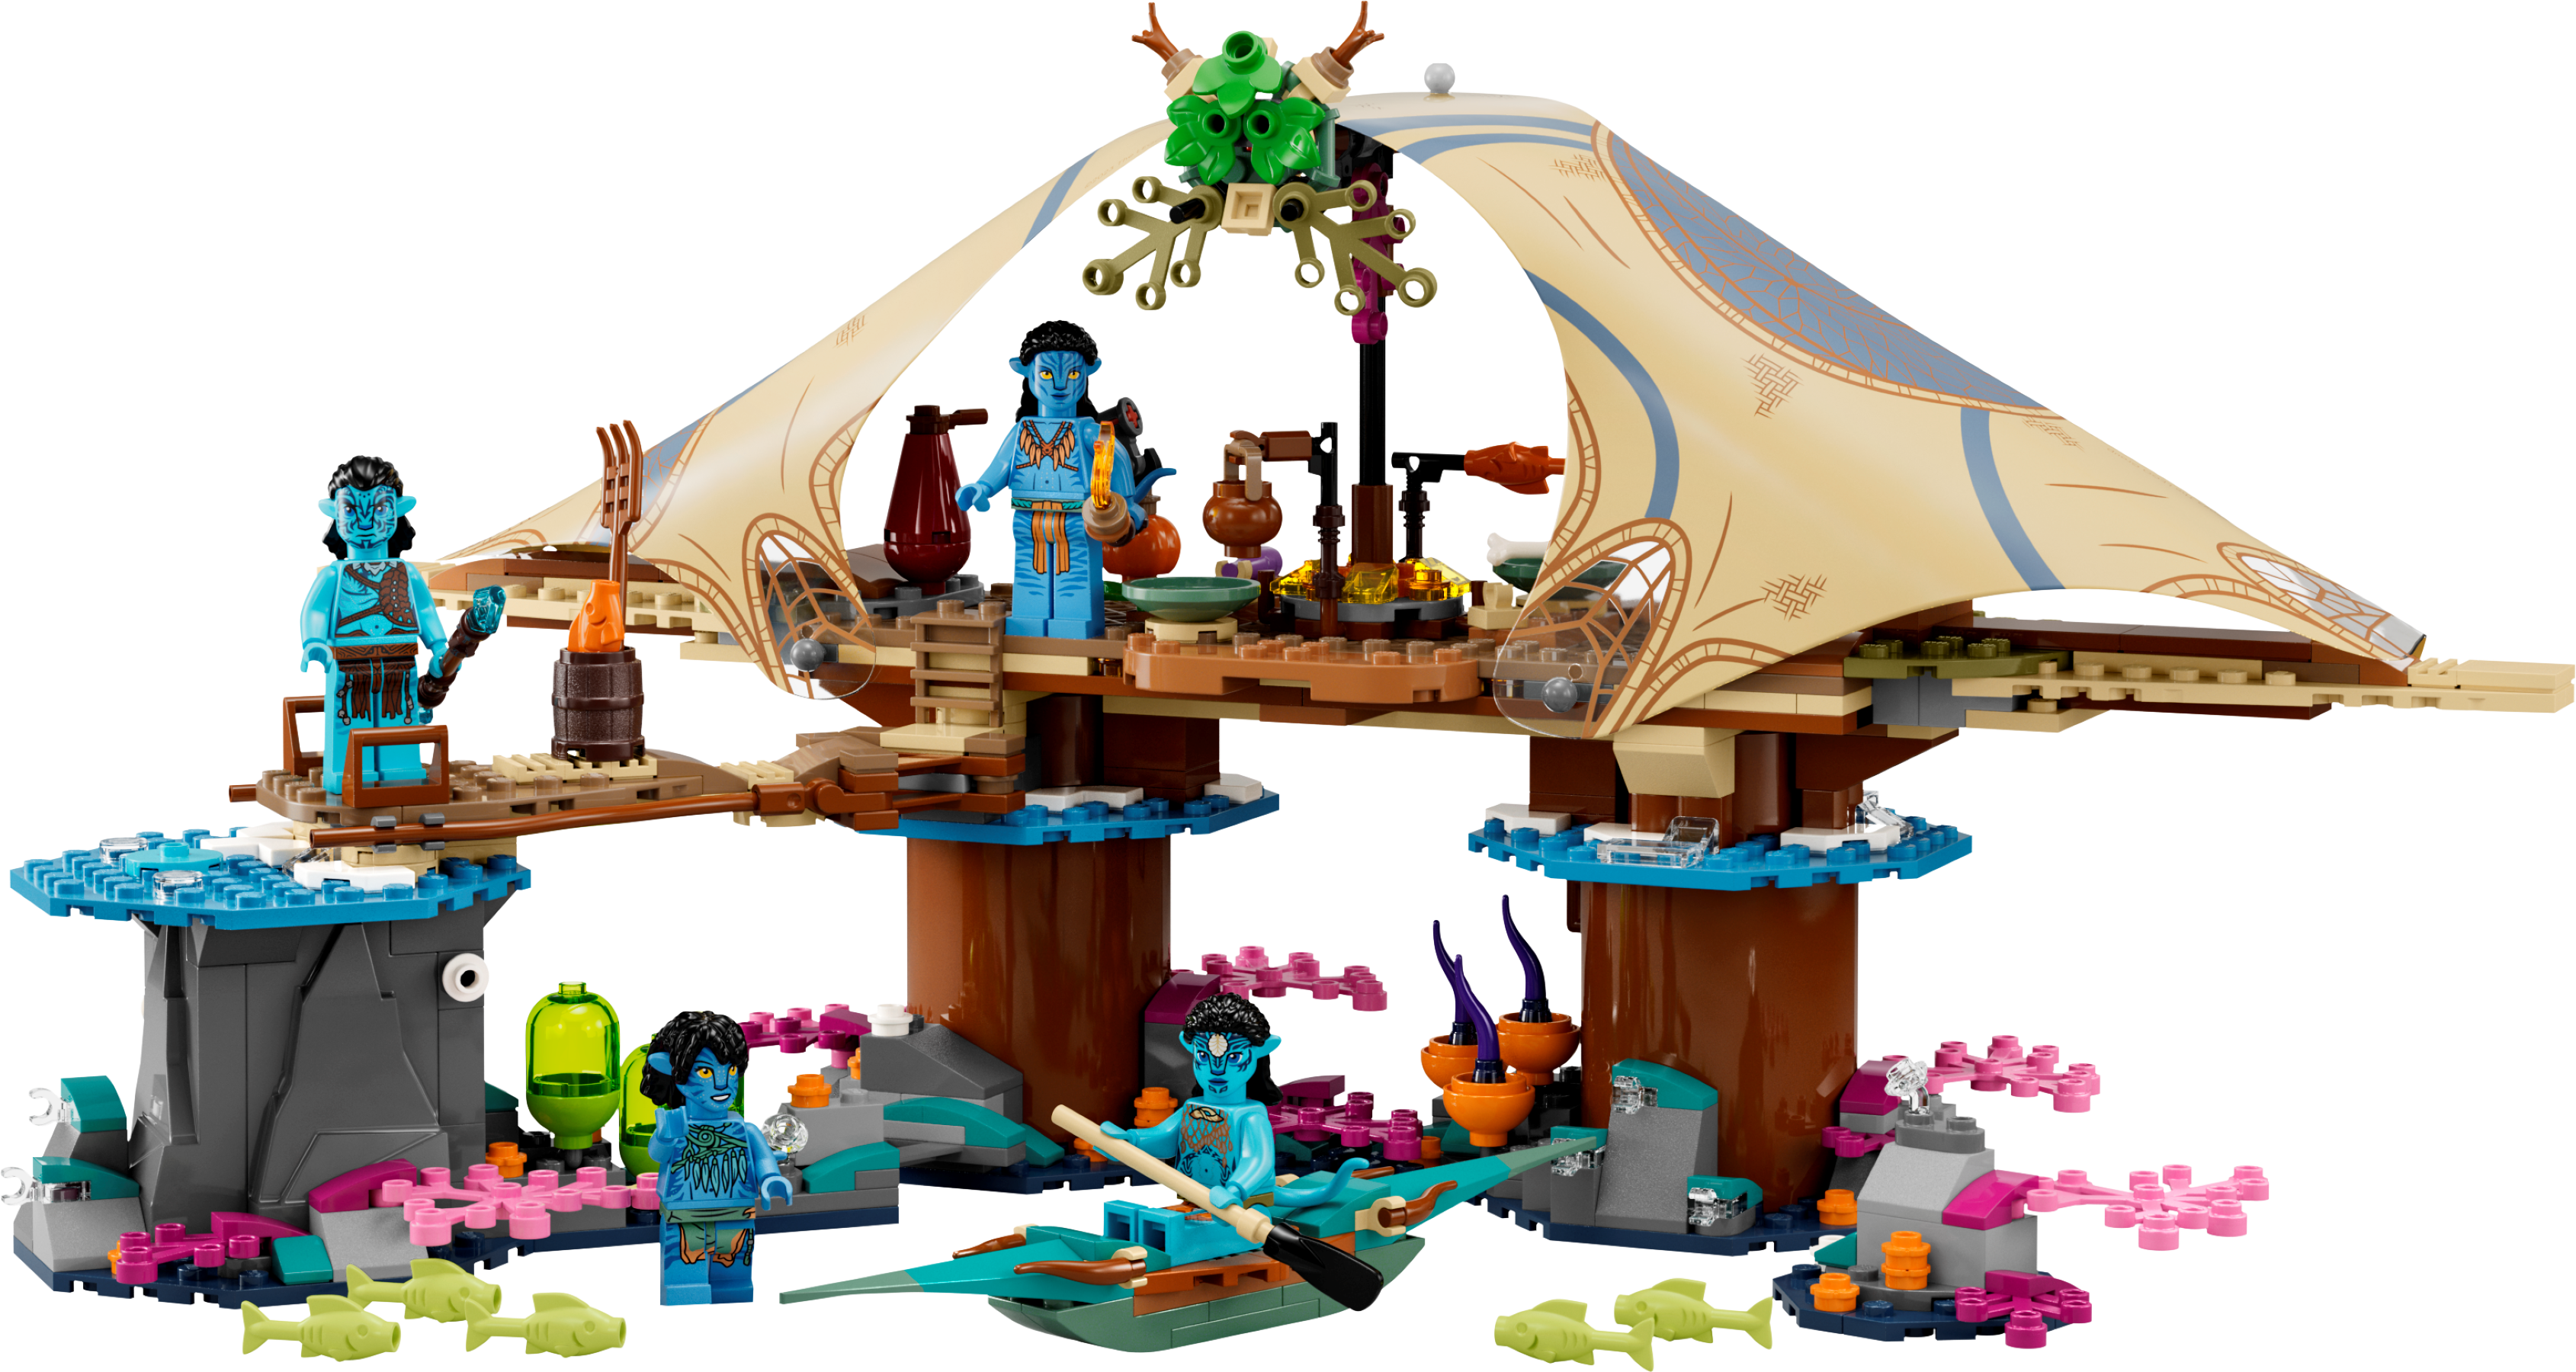 LEGO Avatar, LEGO Avatar sets are not just great for play but look great  on display, with a detailed environment build made for posing the models. .  . . مجموعات